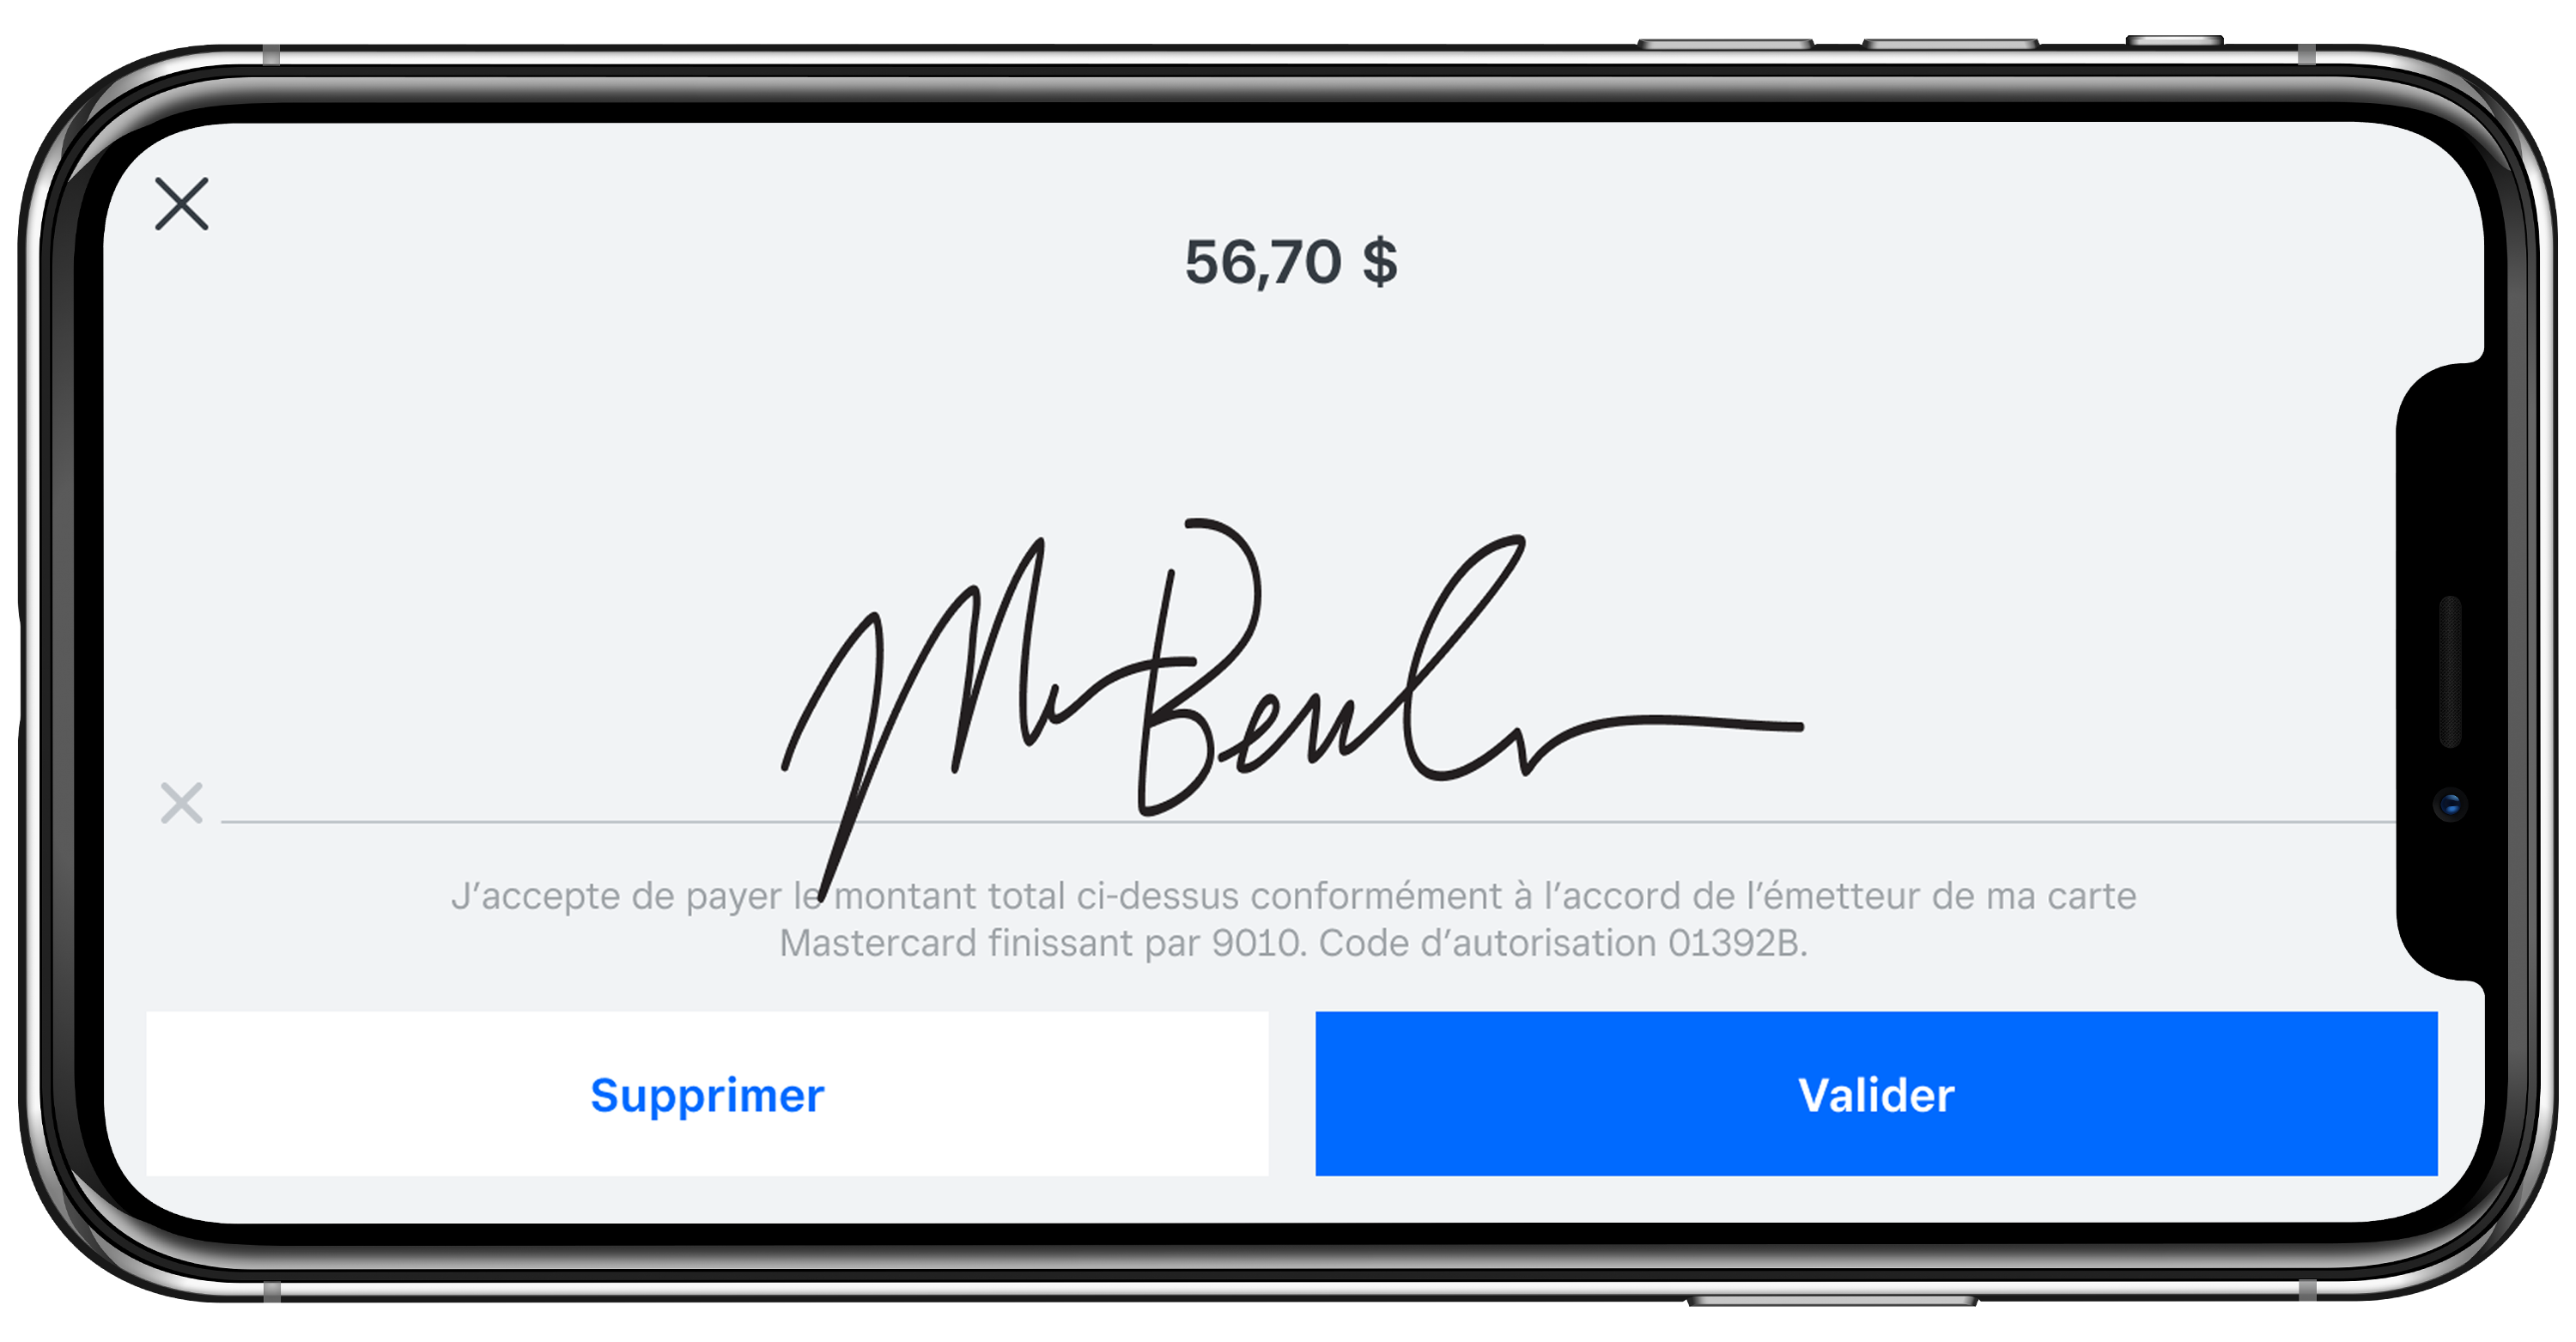 Signature Screen on iphone: X to cancel payment, tipping options, signature line, clear signature, done signing